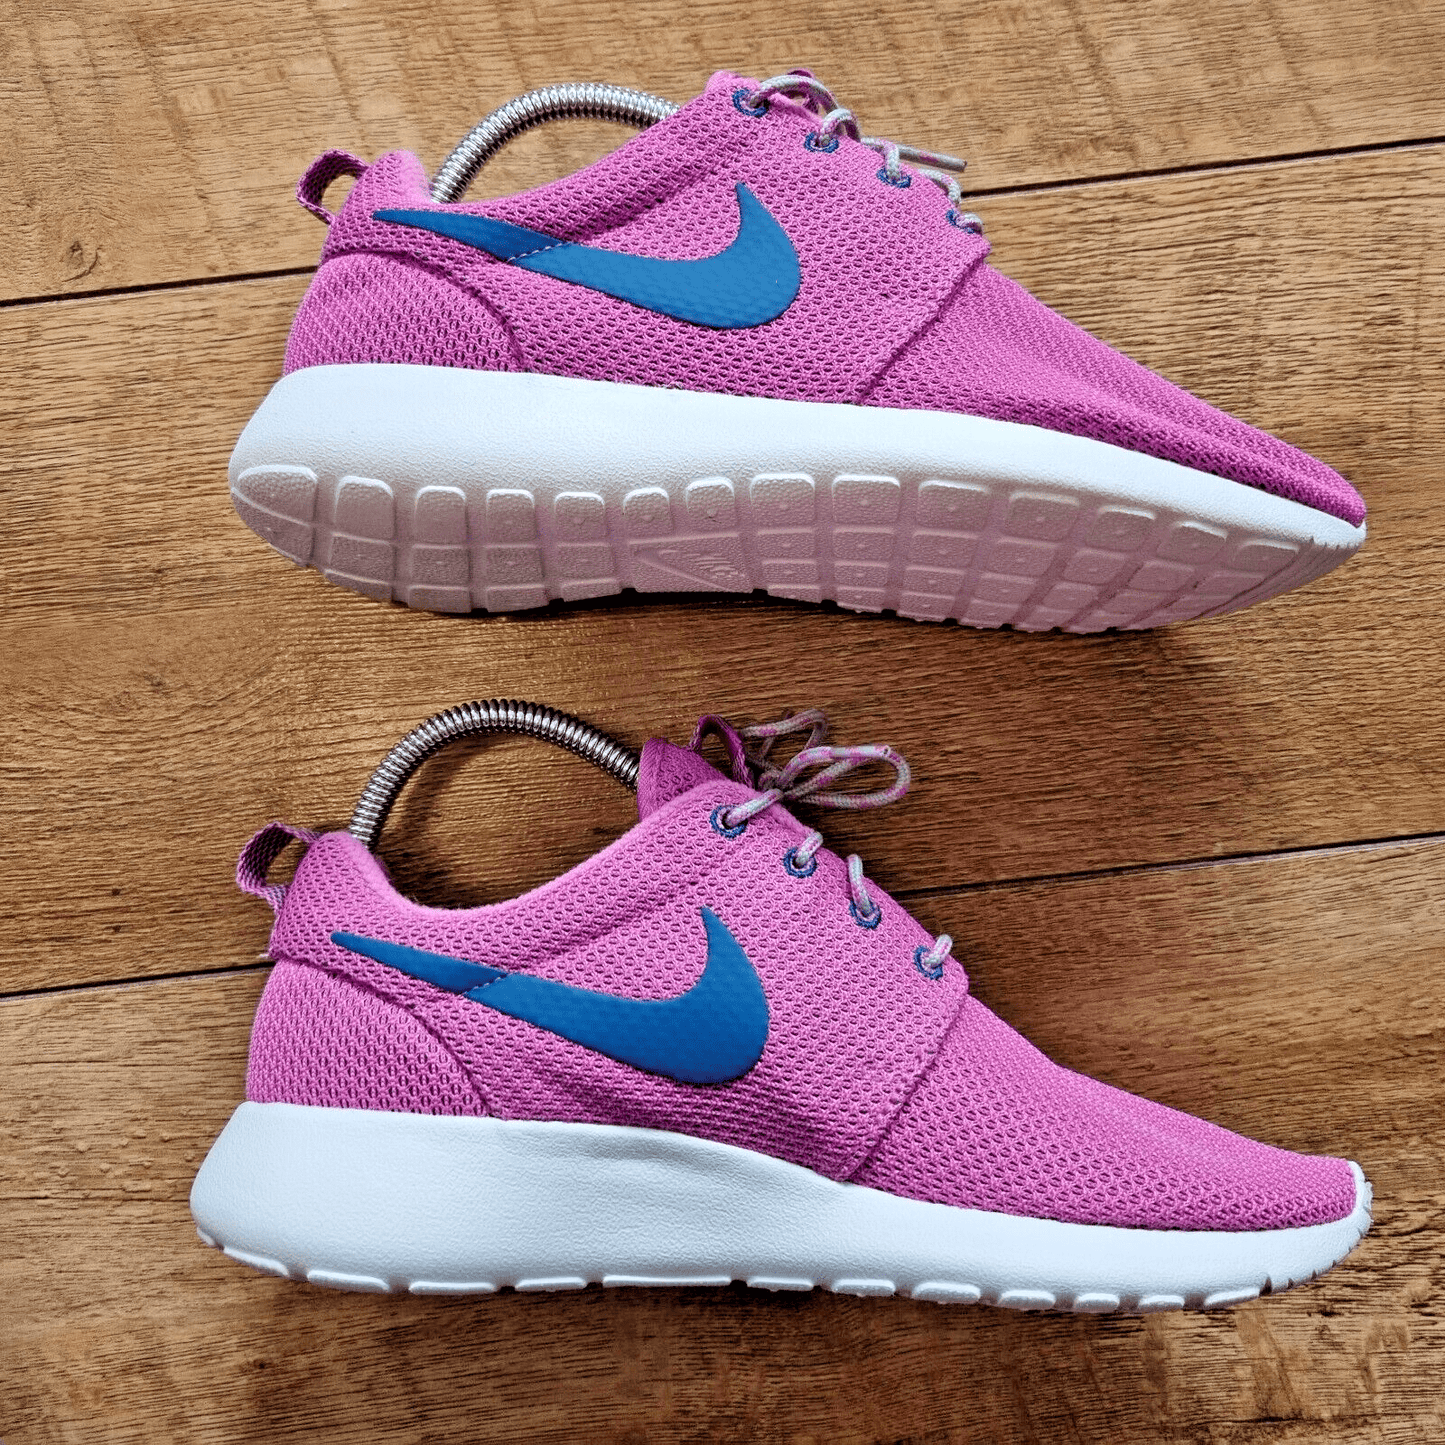 Nike Trainers Roshe One Pink Blast Knitted Lace Up White Soles - Bonnie Lassio